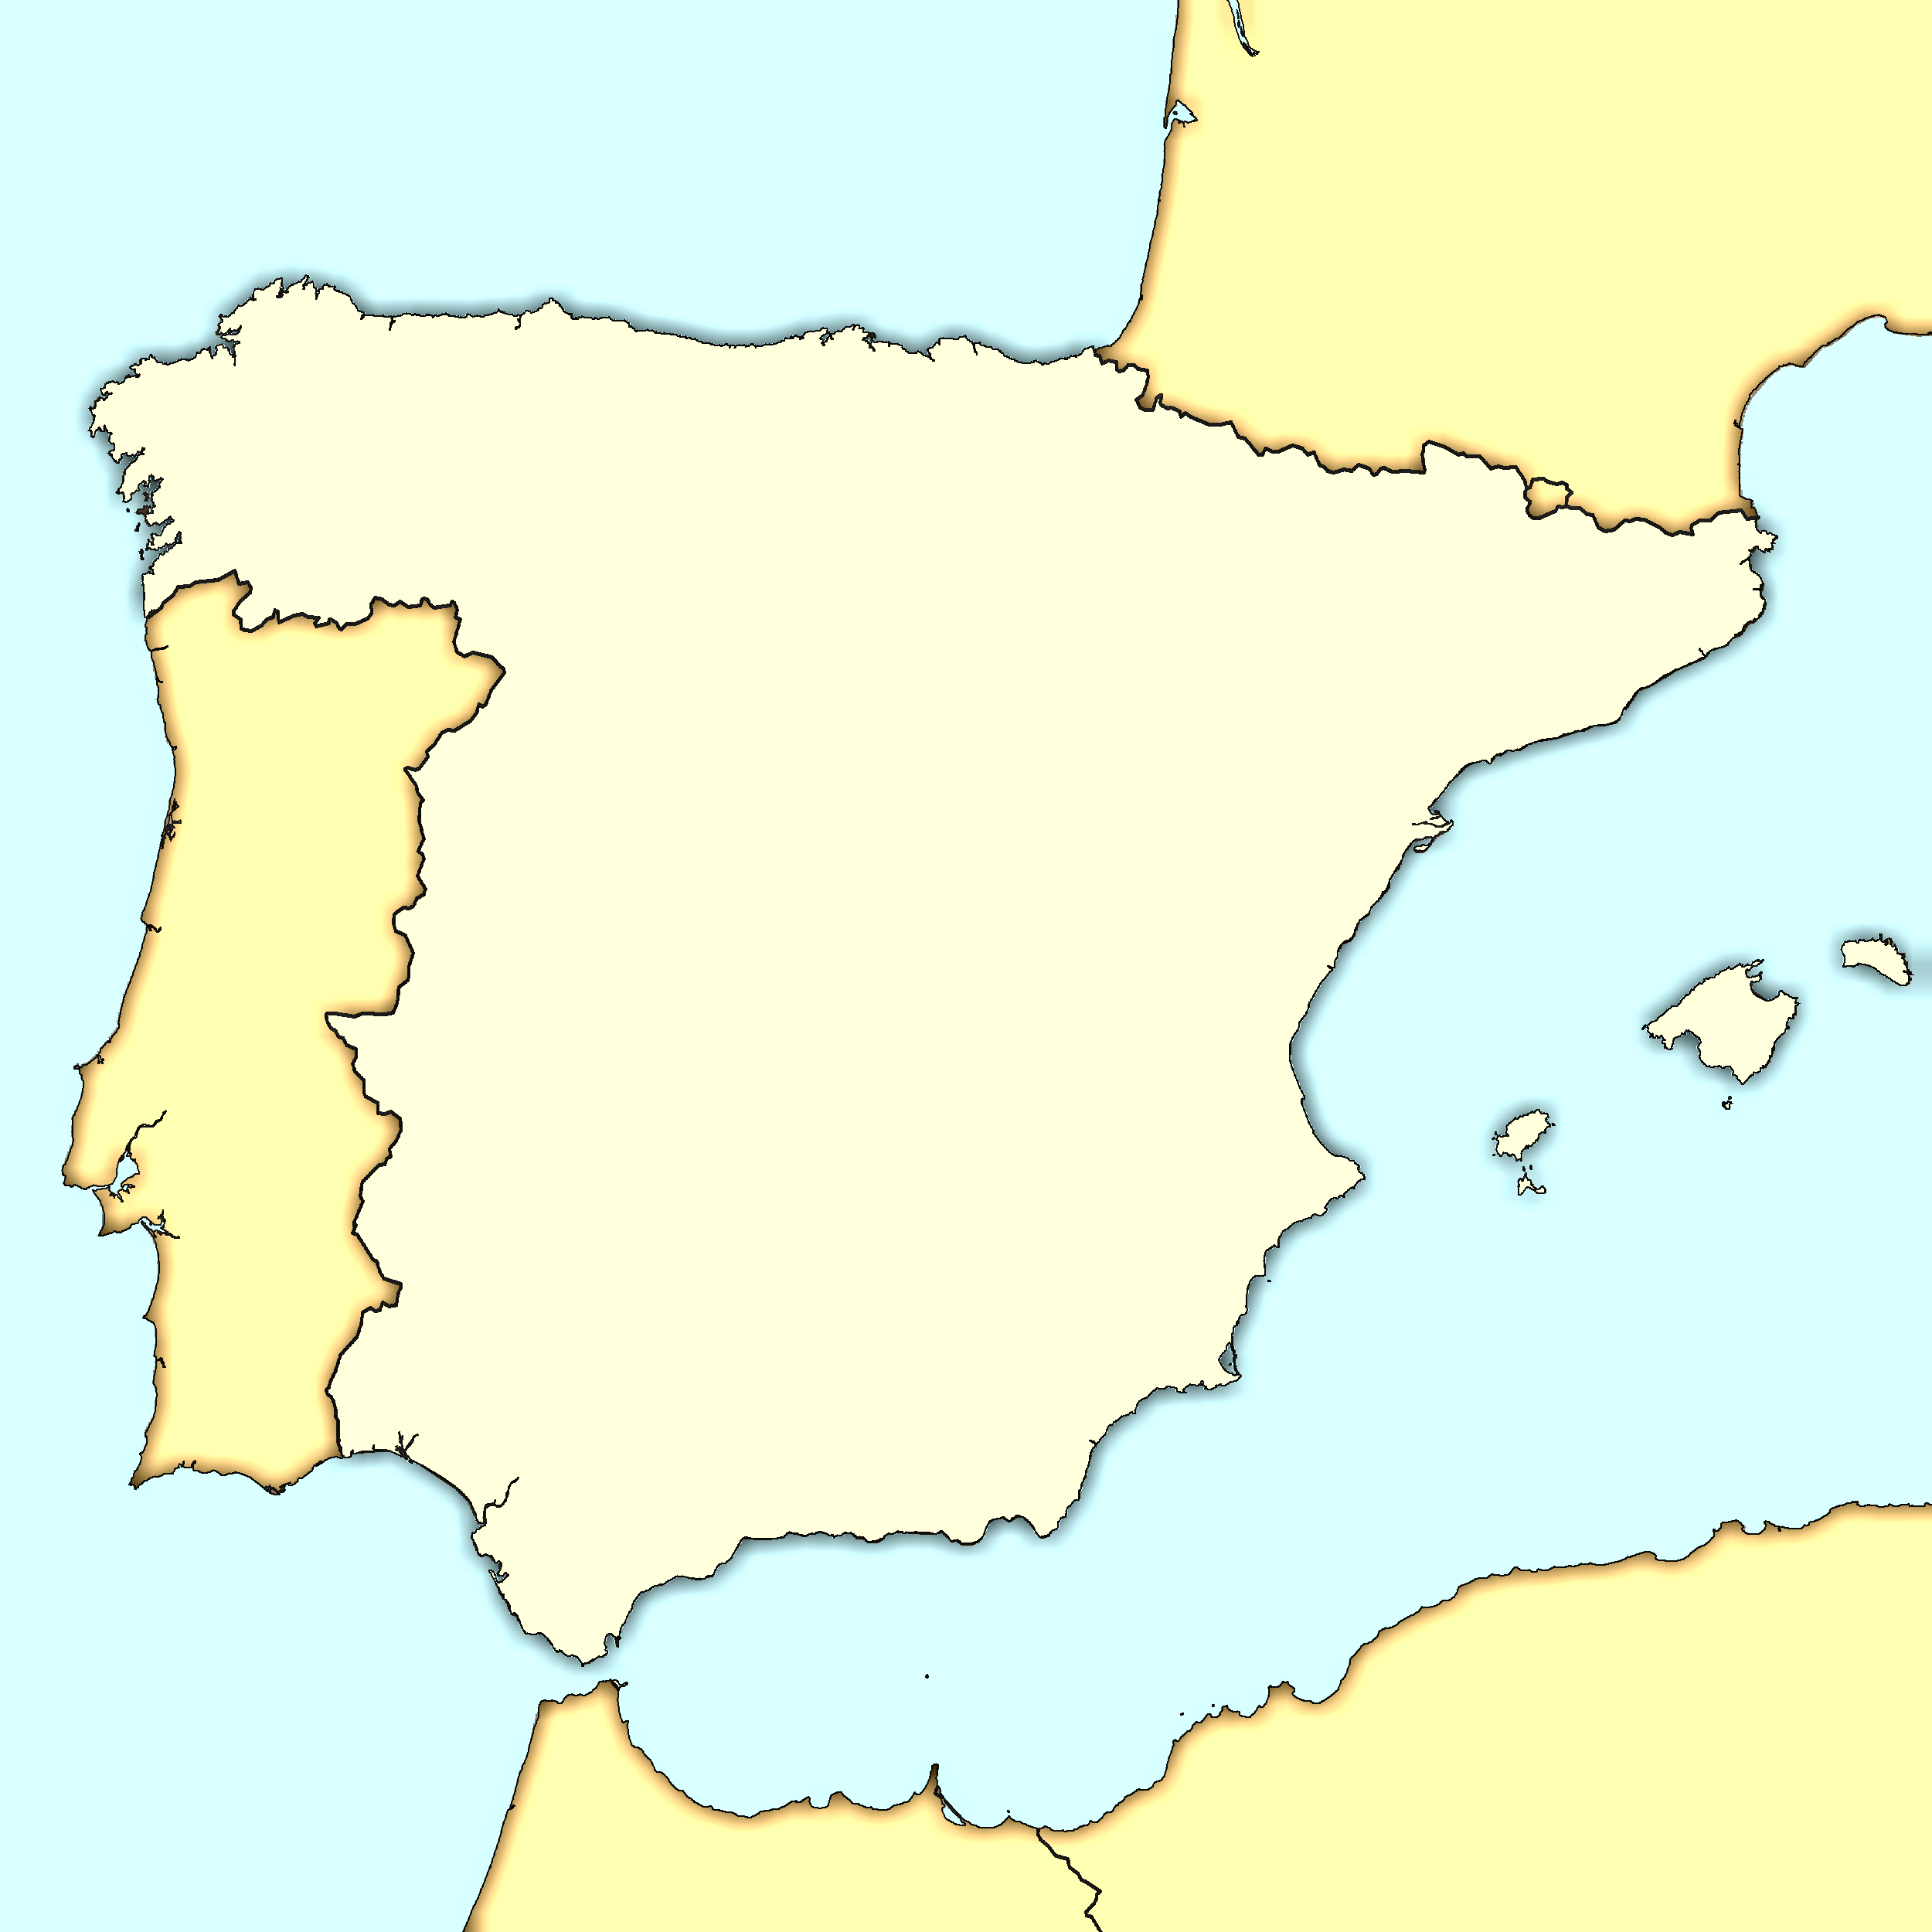 Spain Map Outline